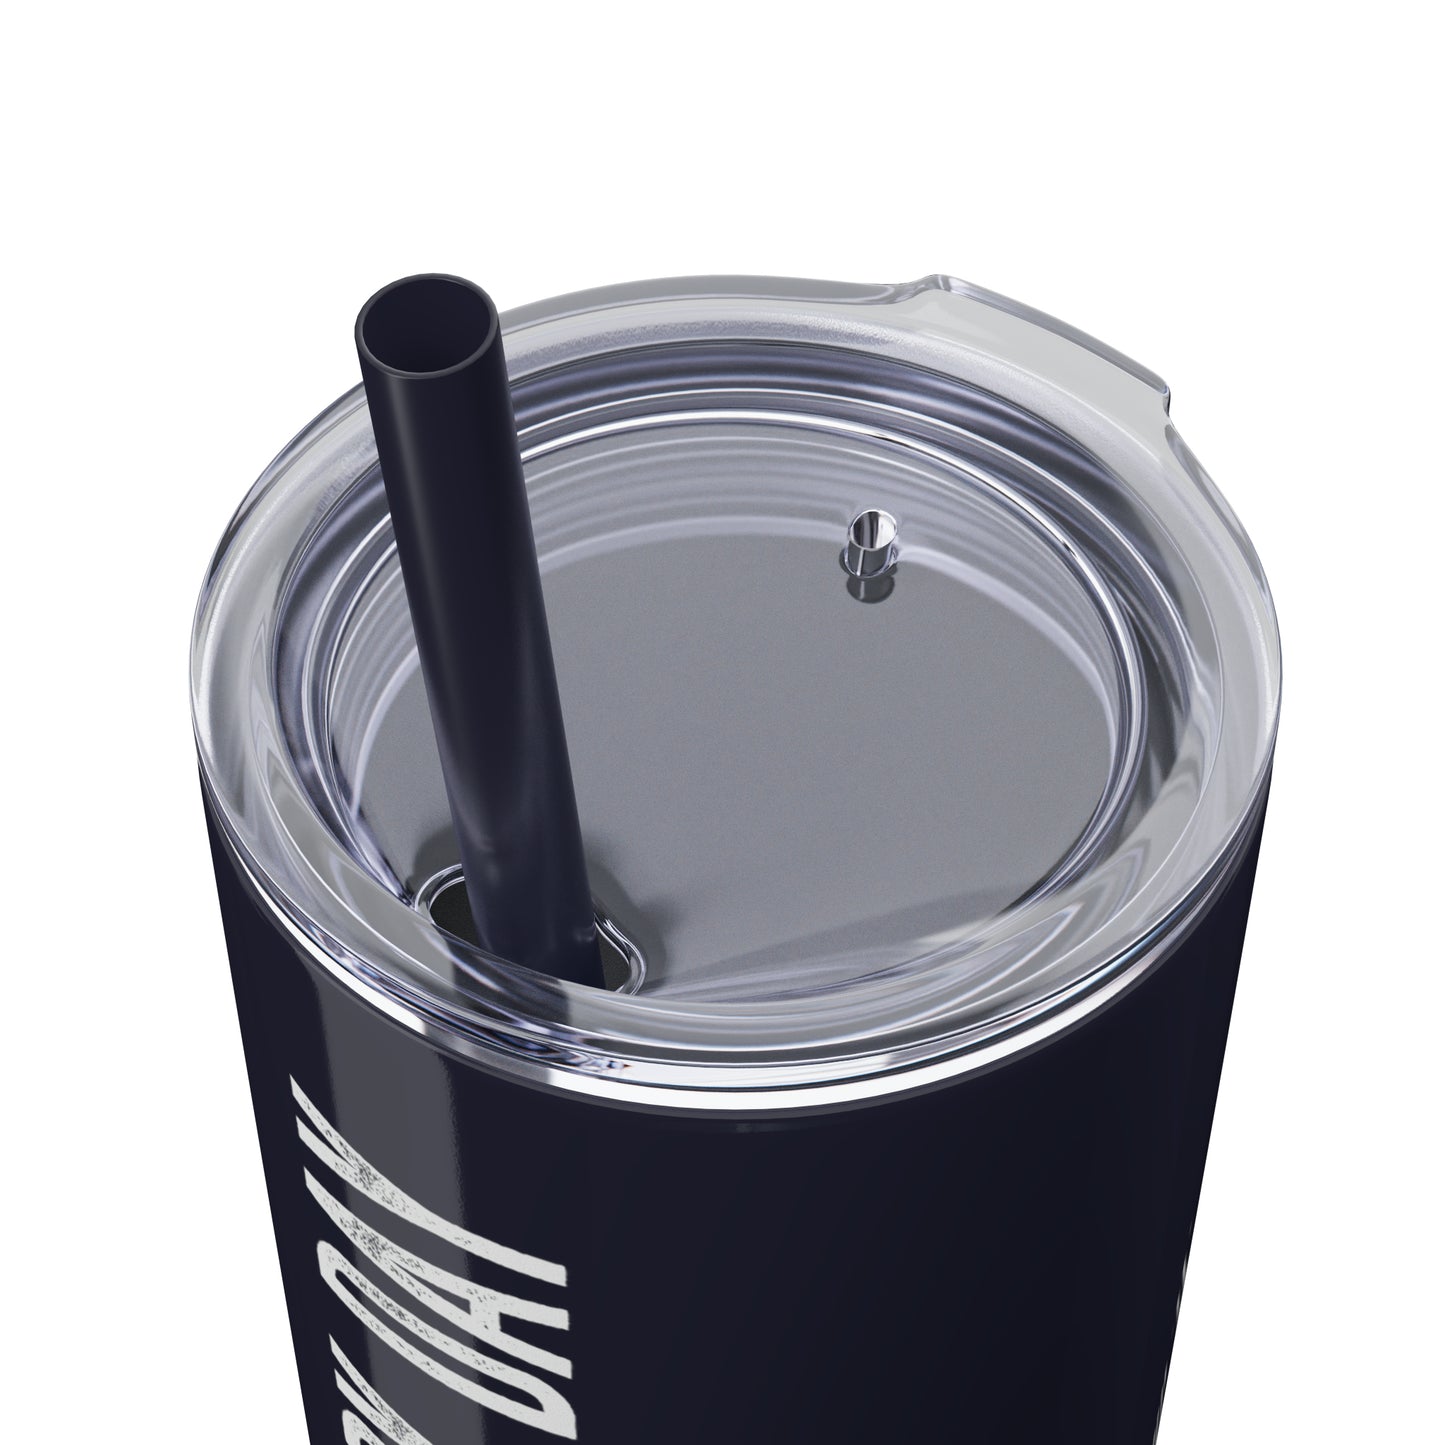 1% Better Every Day: Skinny Tumbler with Straw, 20oz